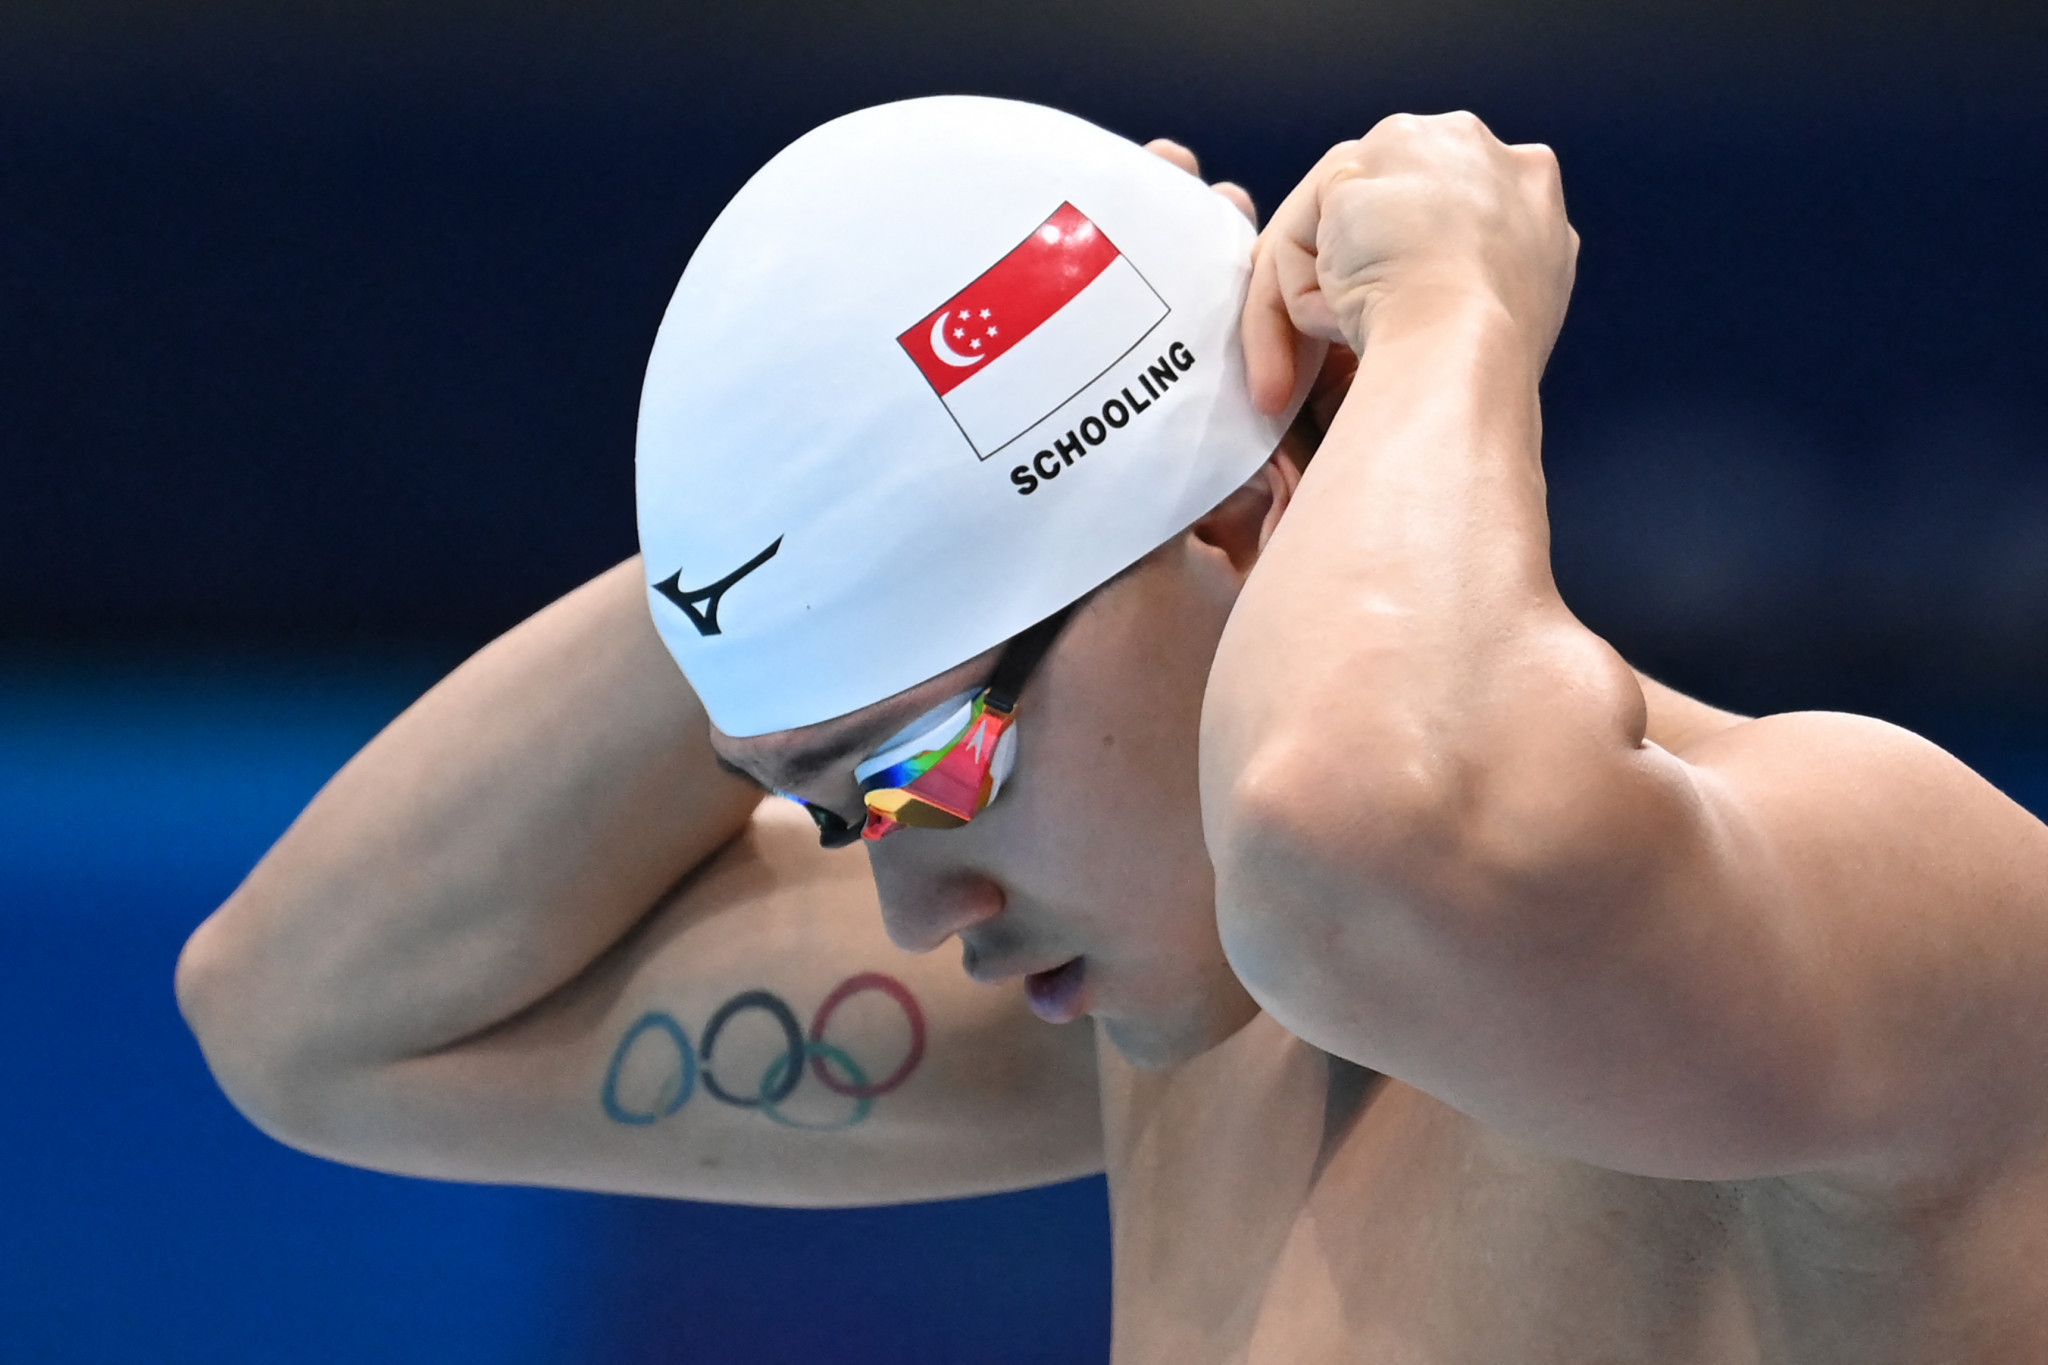 Joseph Schooling has been given a fine by the SNOC over using cannabis ©Getty Images